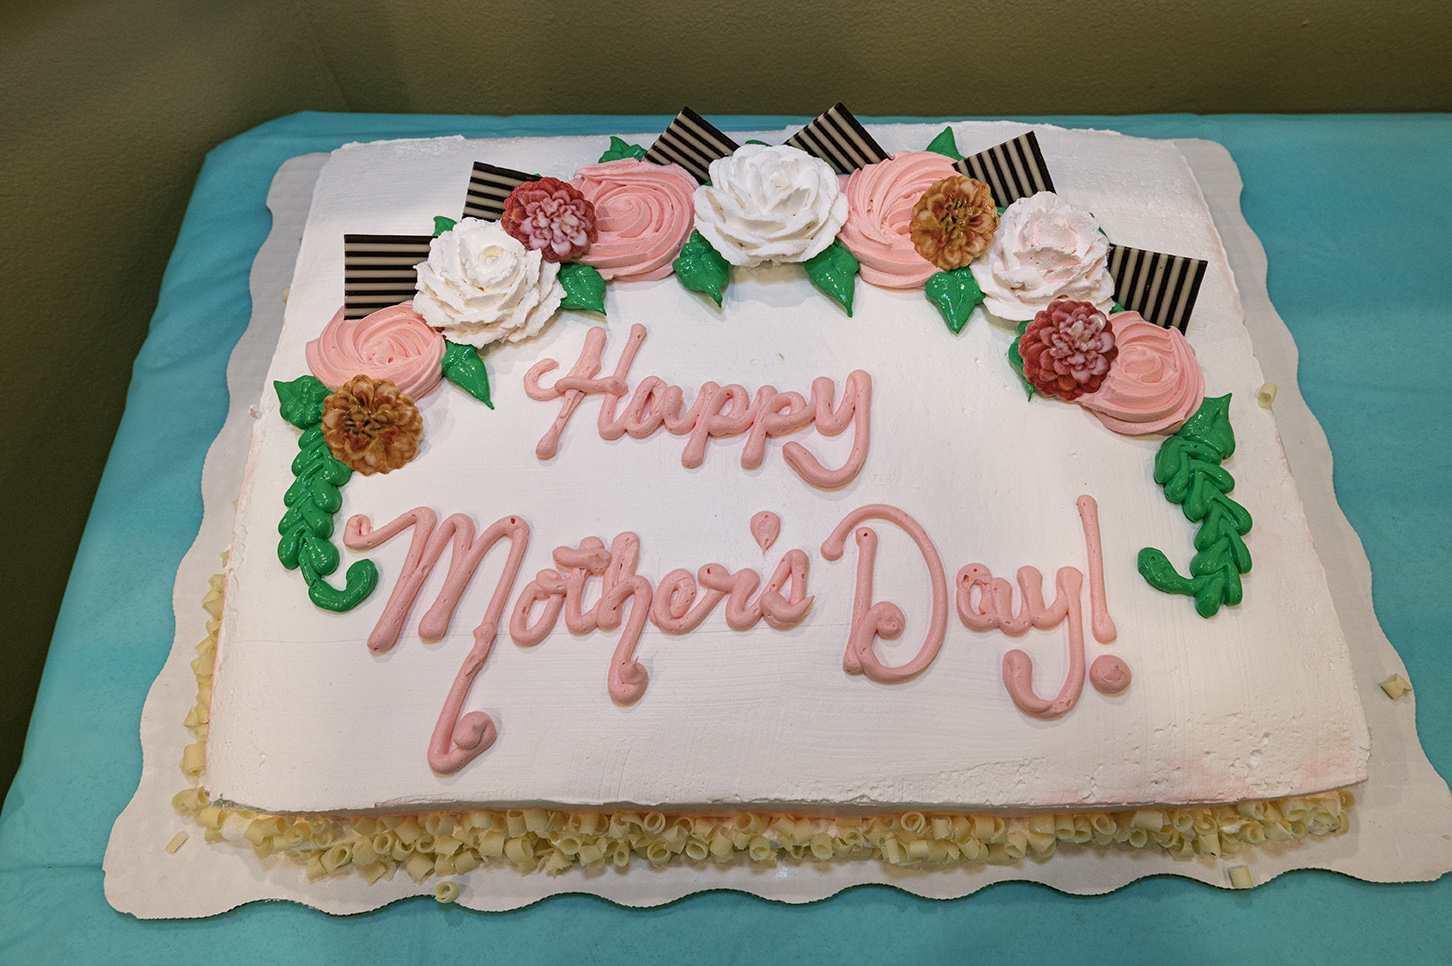 Moultrie_Mothers Day_1821